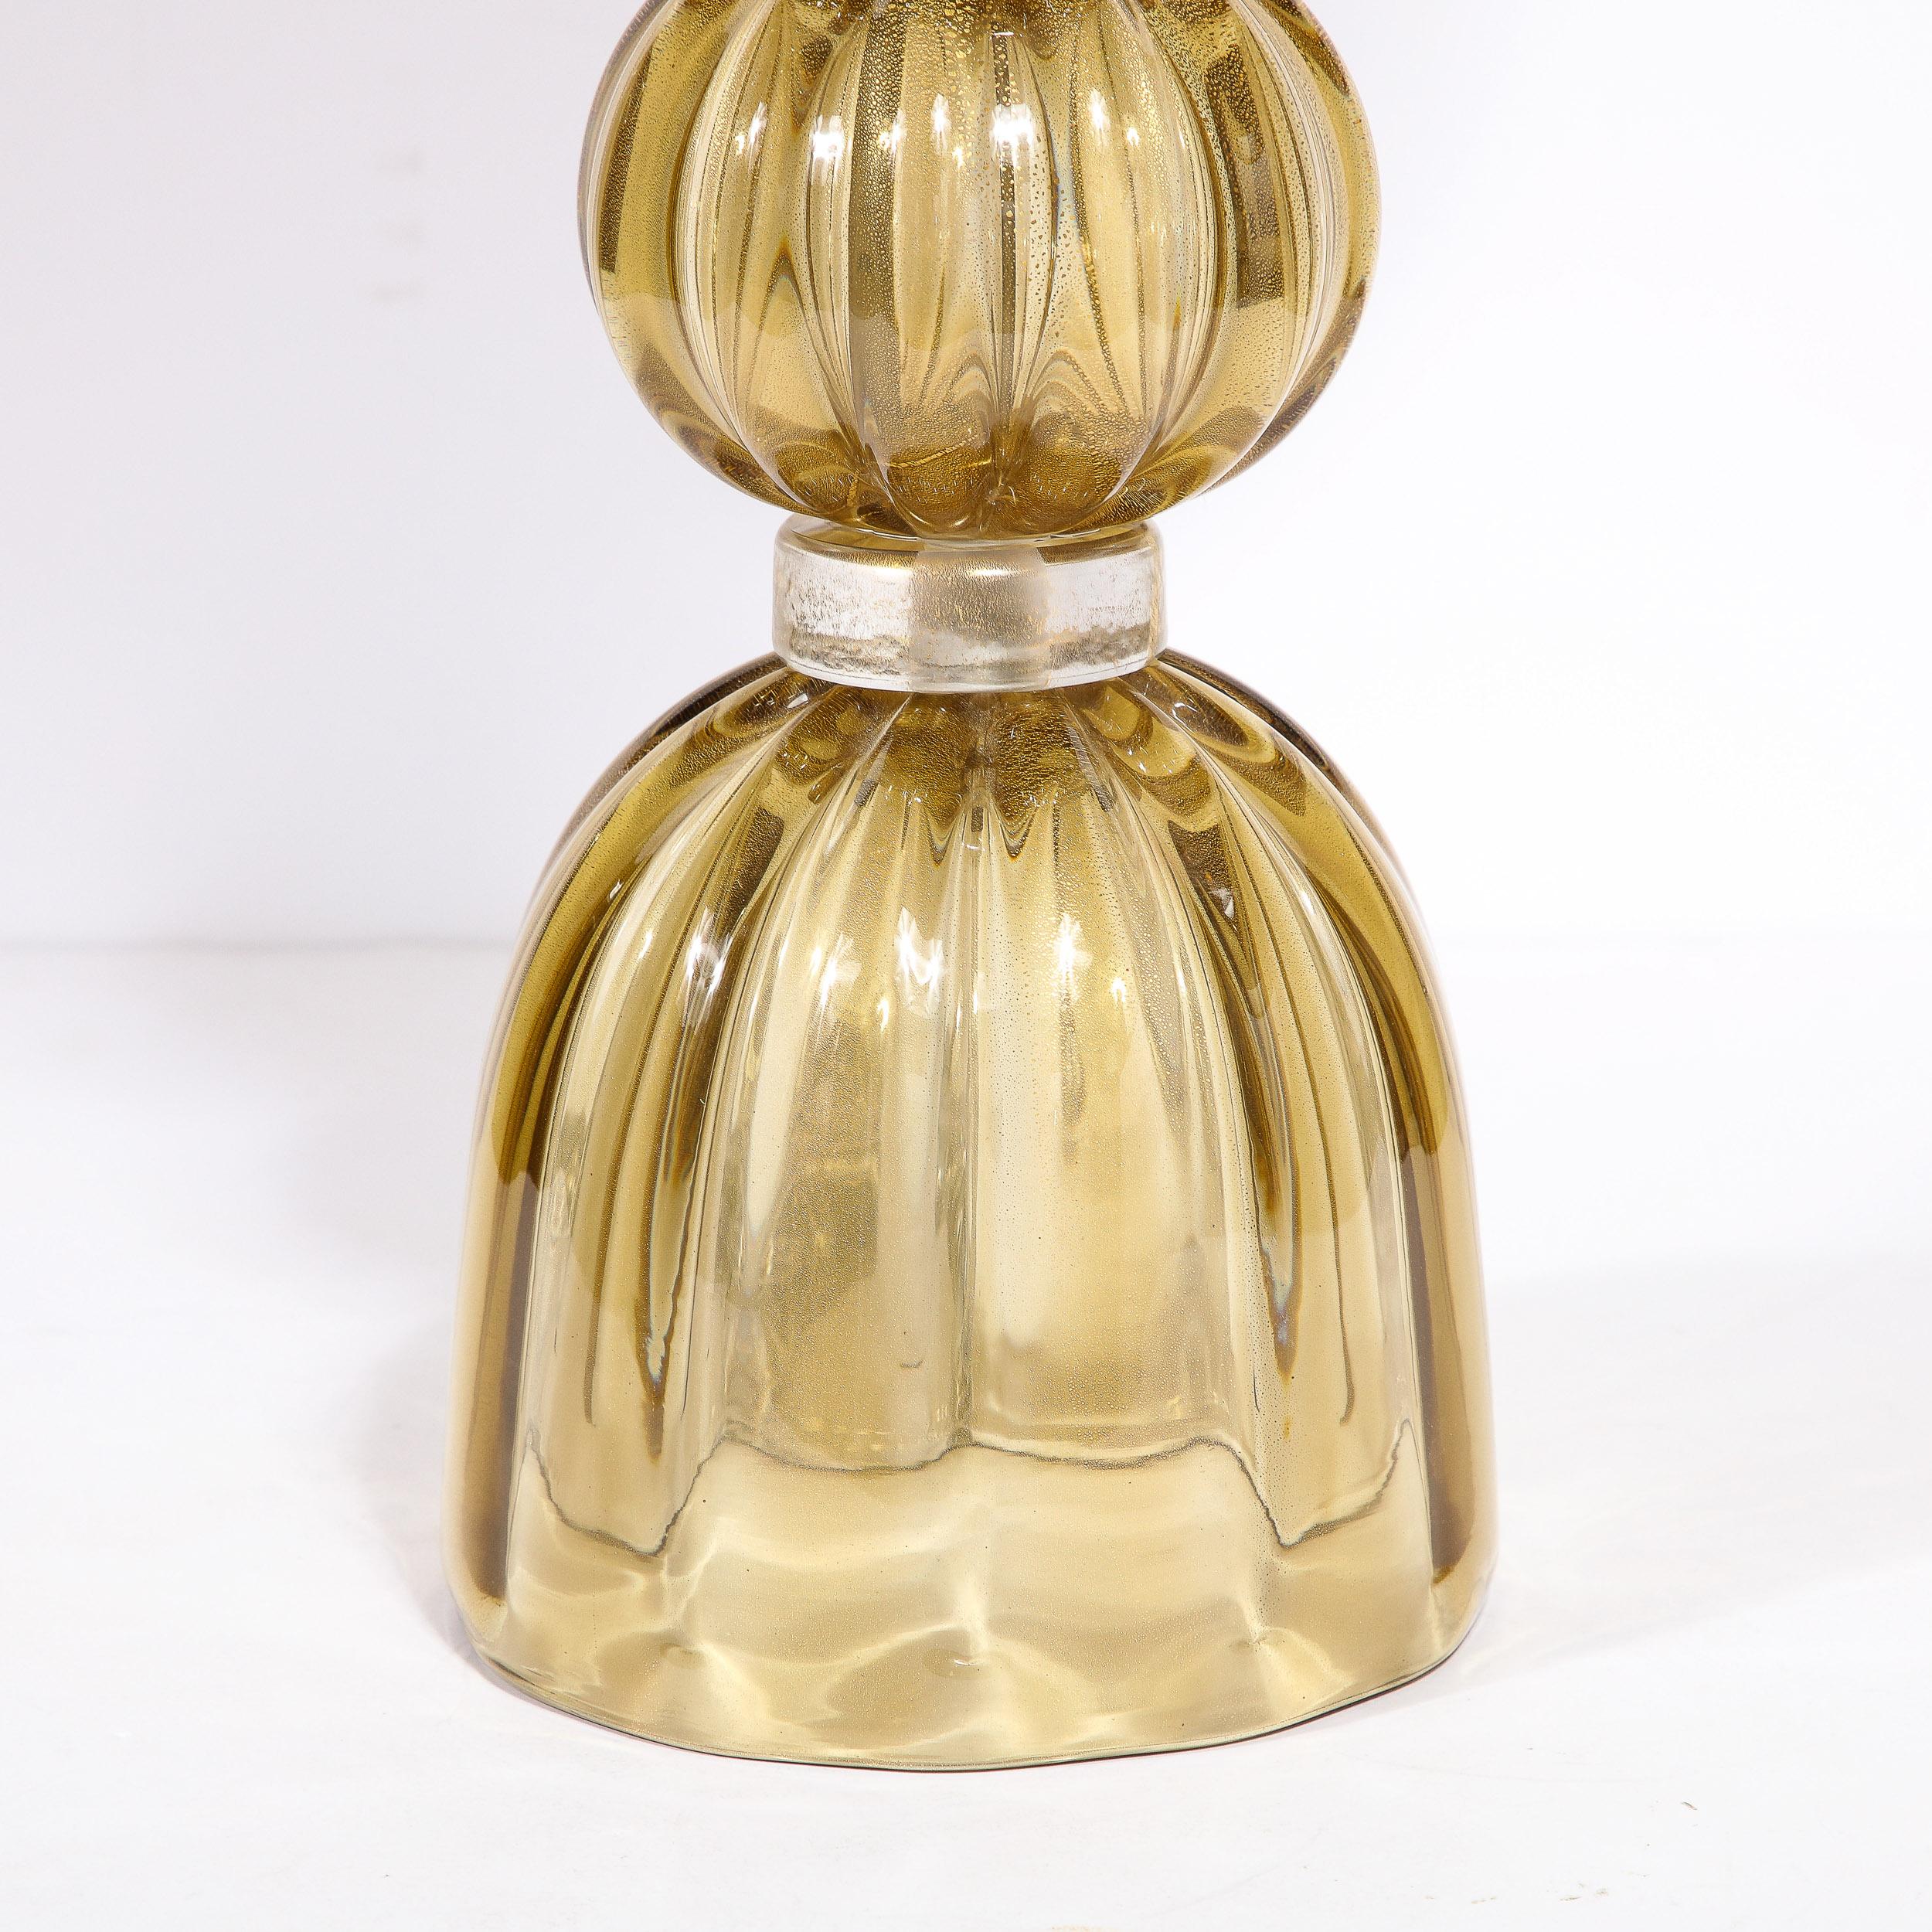 Contemporary Modernist Hand-Blown Murano Glass Table Lamps in Smoked Gold W/ 24 Karat Flecks For Sale